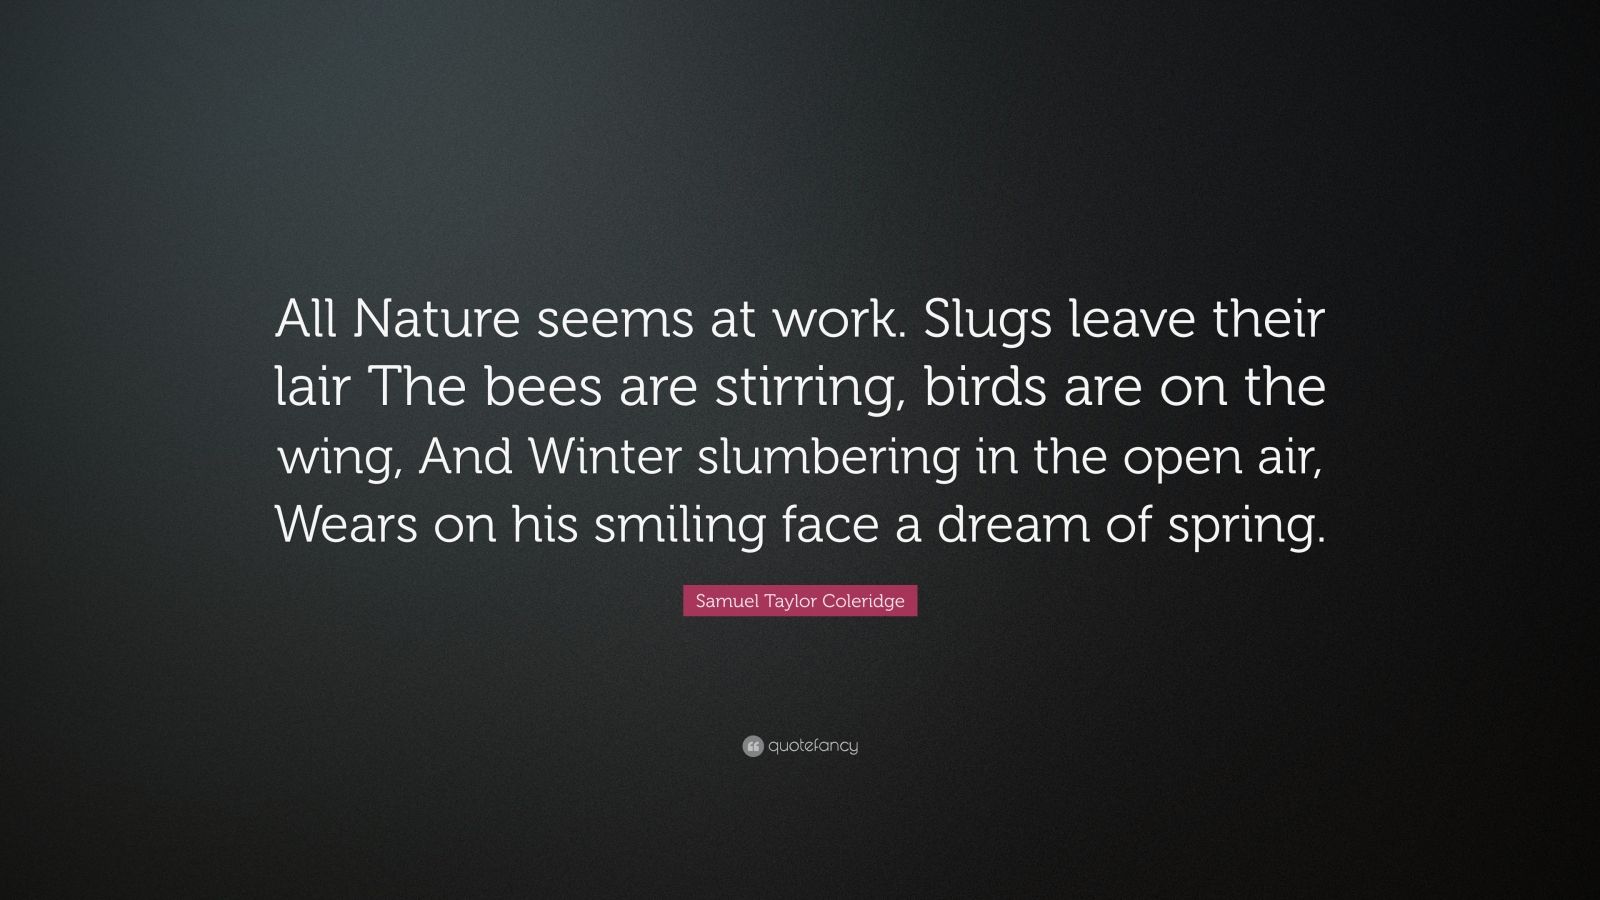 Samuel Taylor Coleridge Quote: “All Nature seems at work. Slugs leave their lair The ...1600 x 900